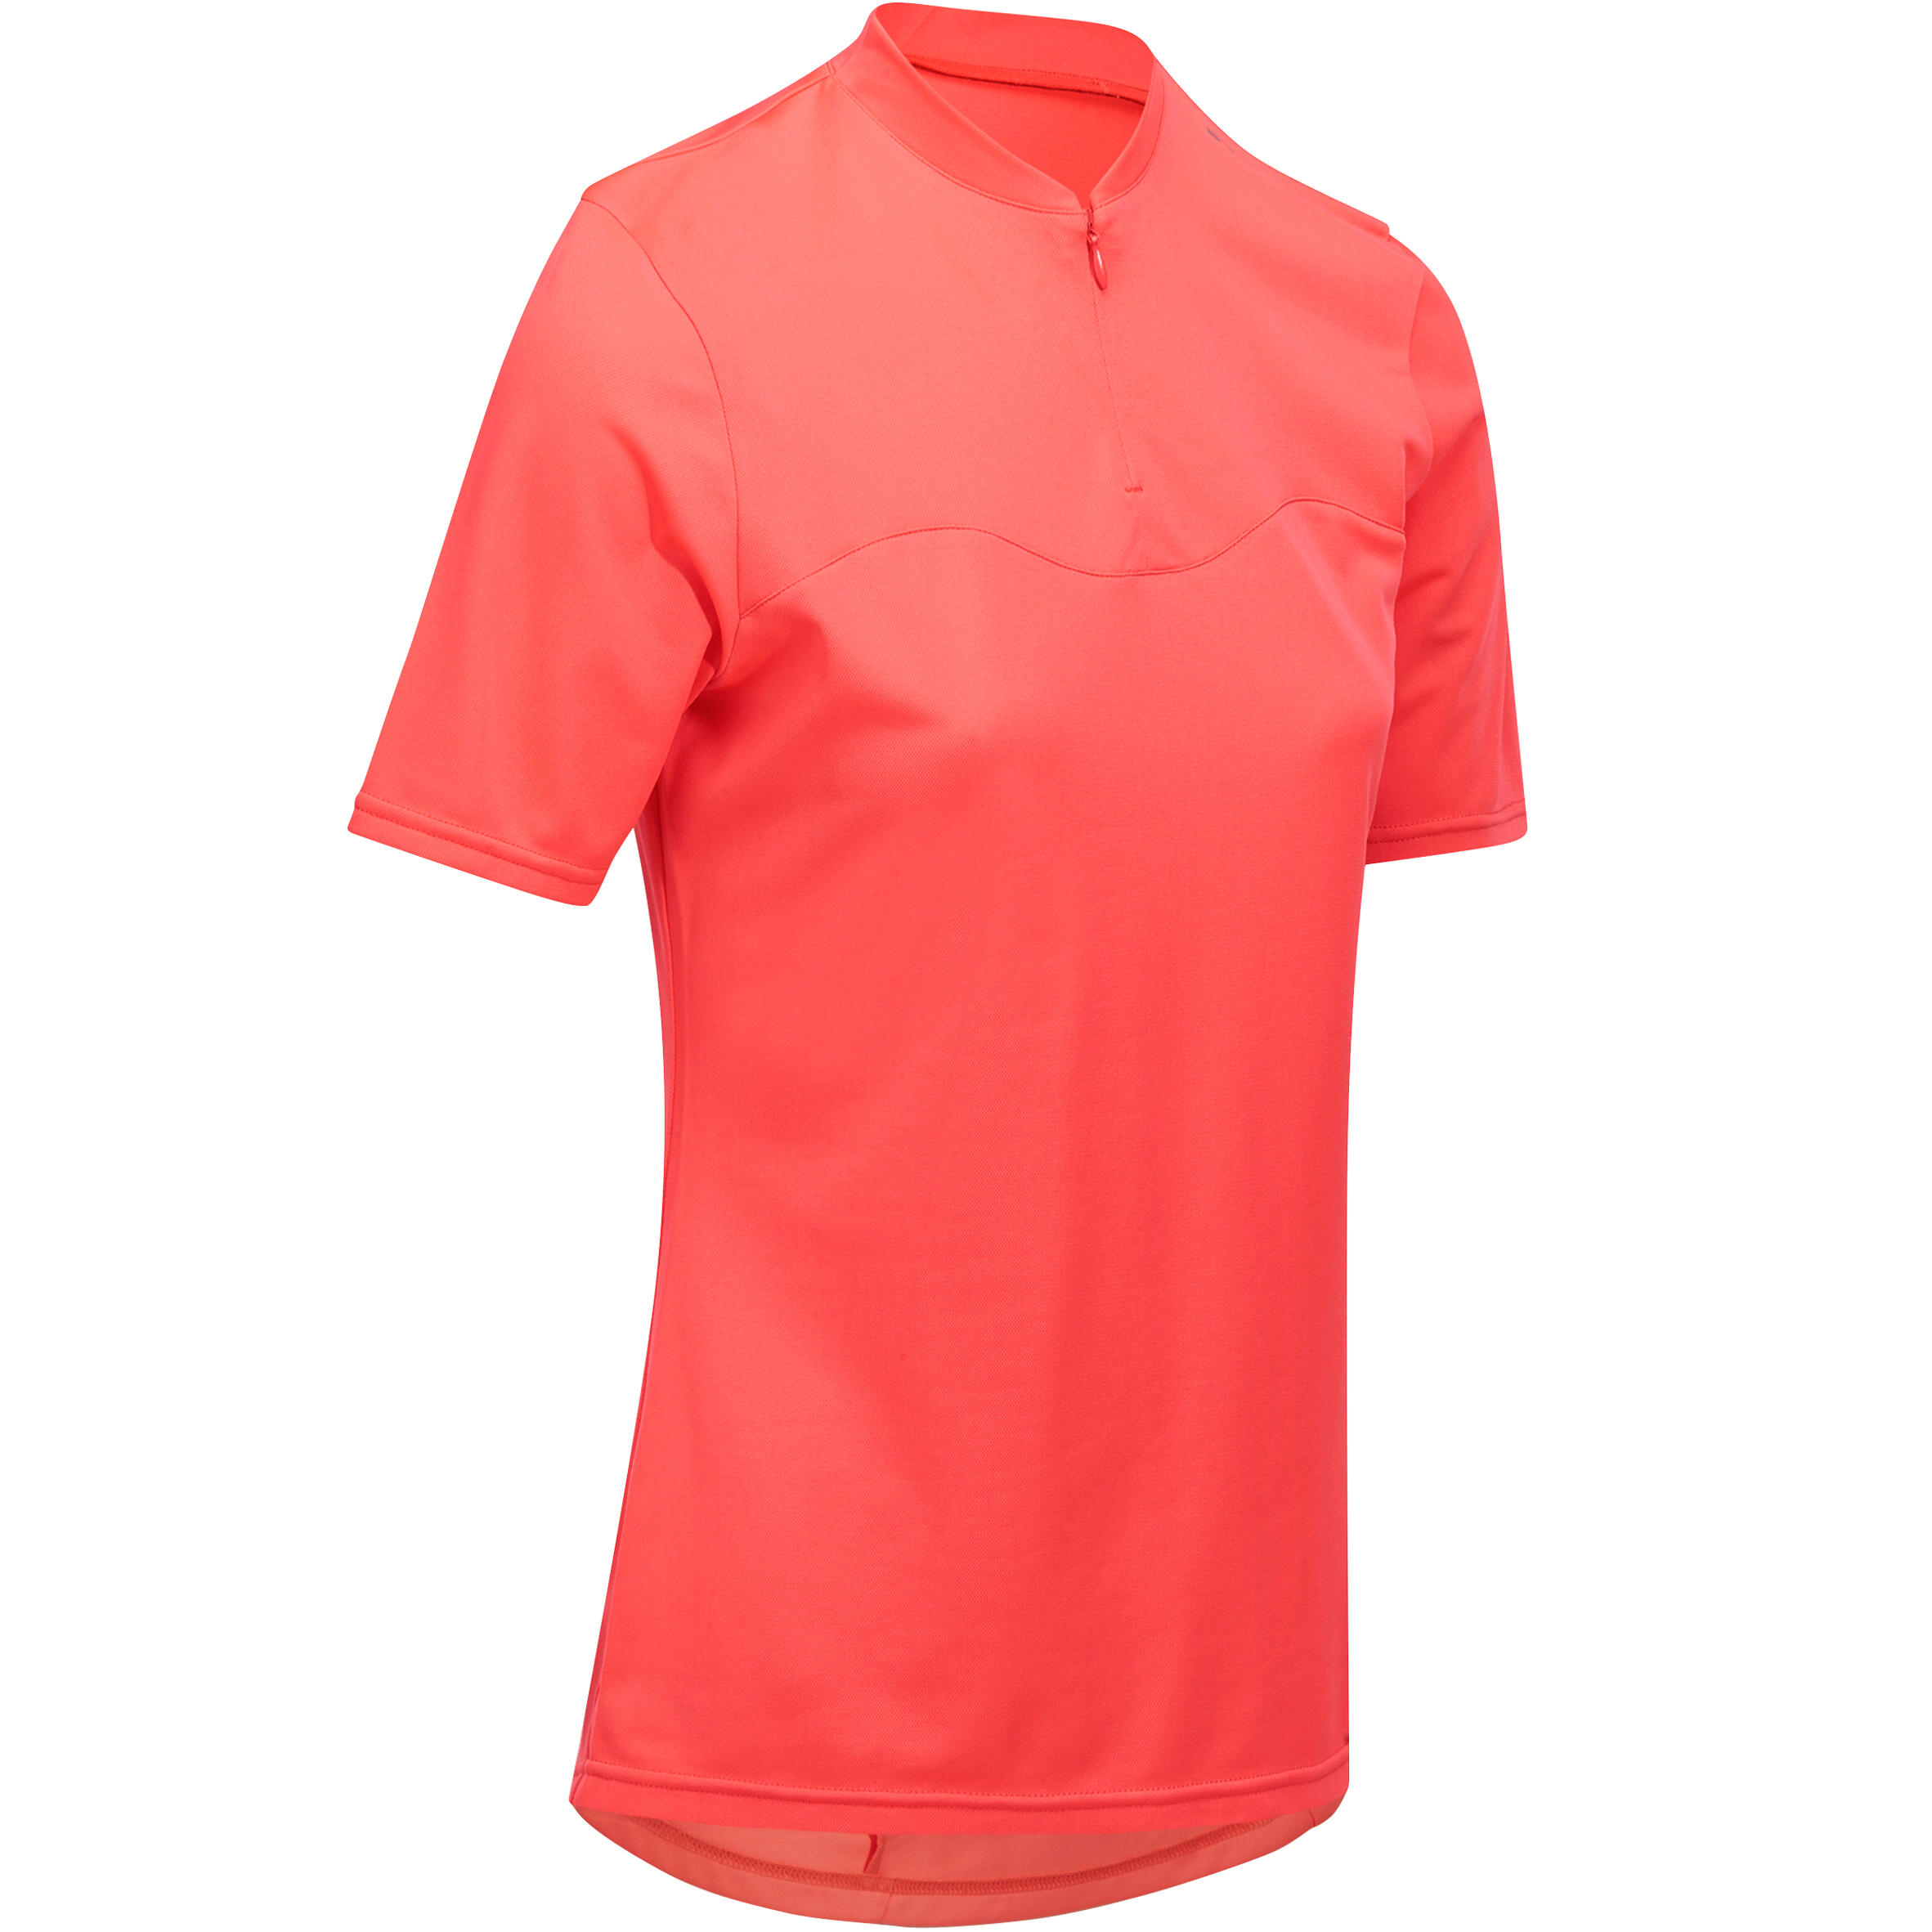 100 Women's Short-Sleeved Cycling Jersey - Pink 6/20